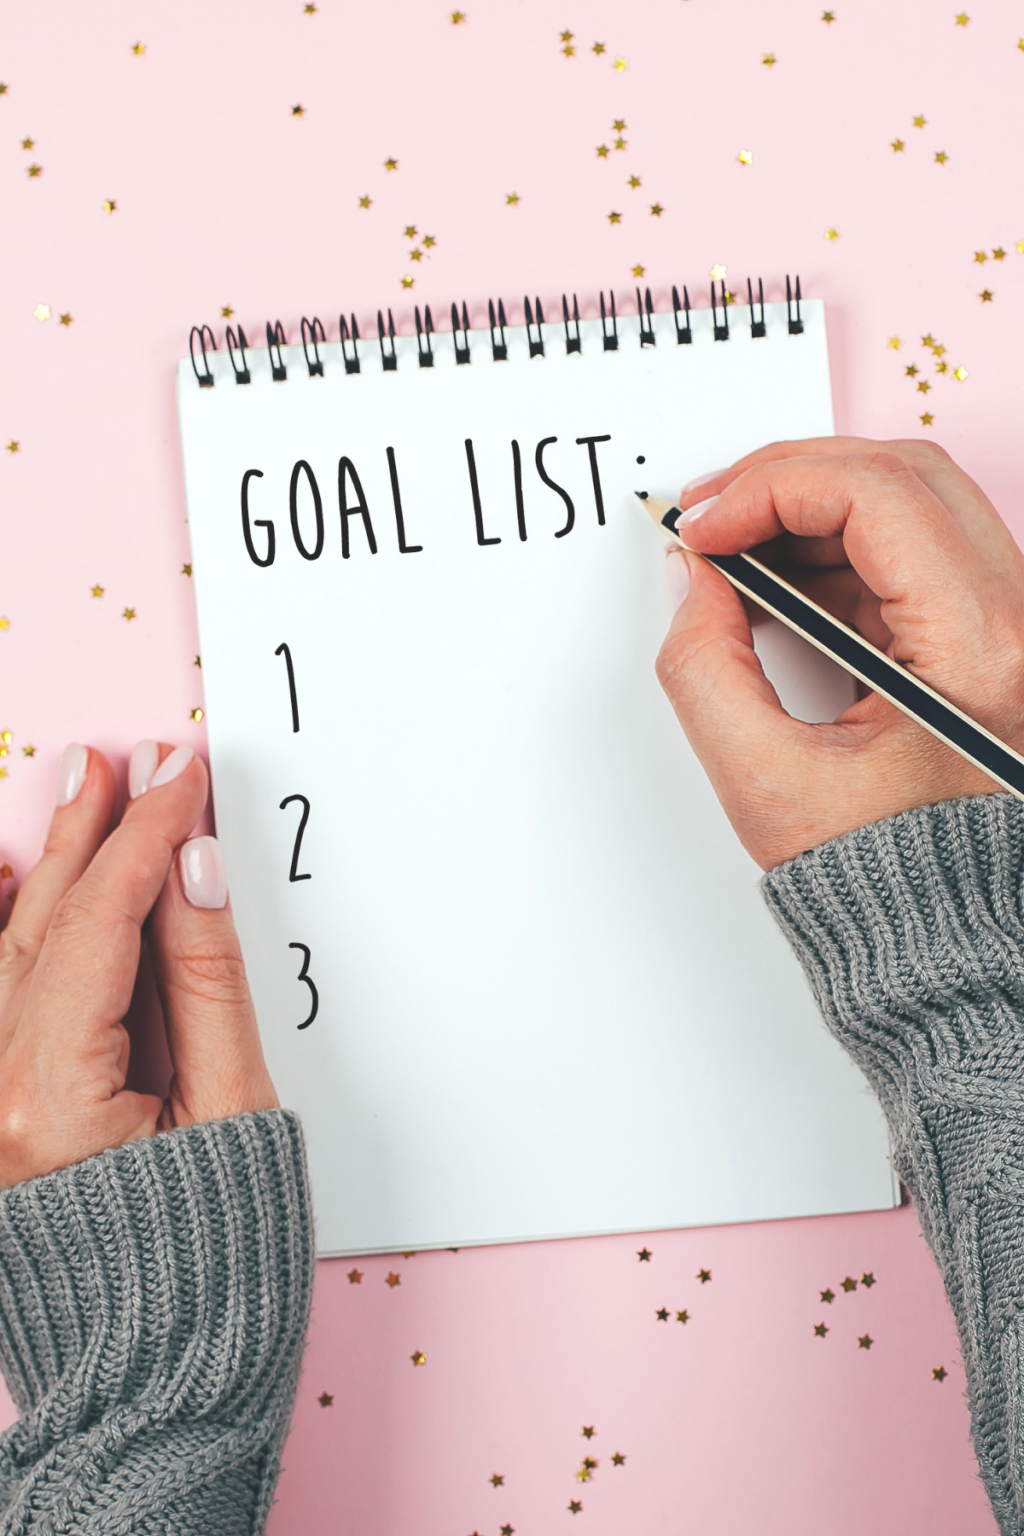 How to Keep Your Goals